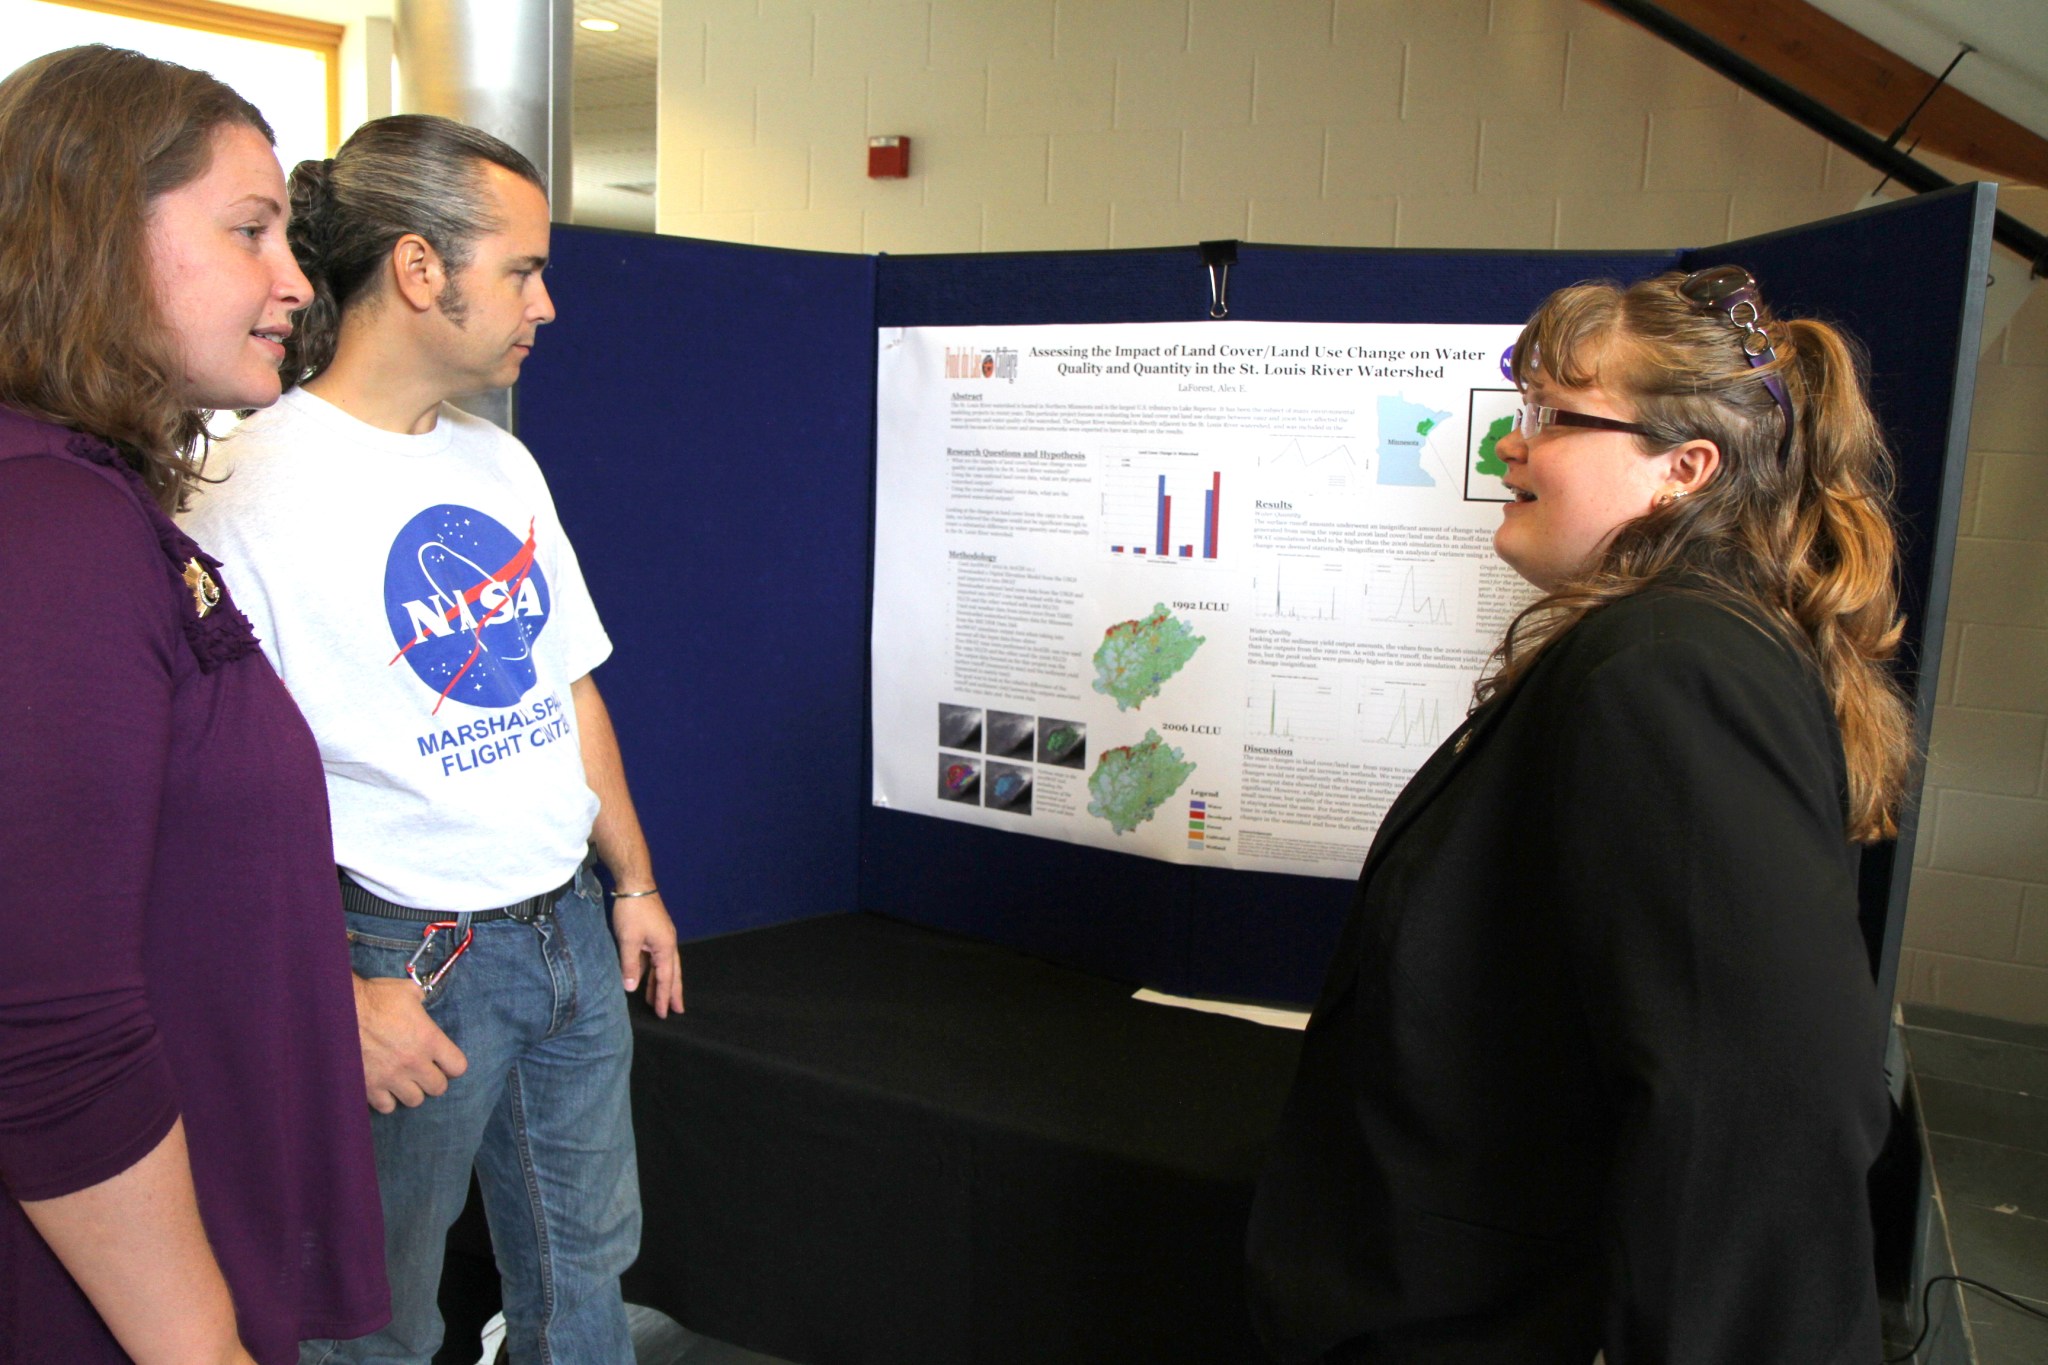 Students and NASA experts worked many hours researching environmental data models for the EMARE project.